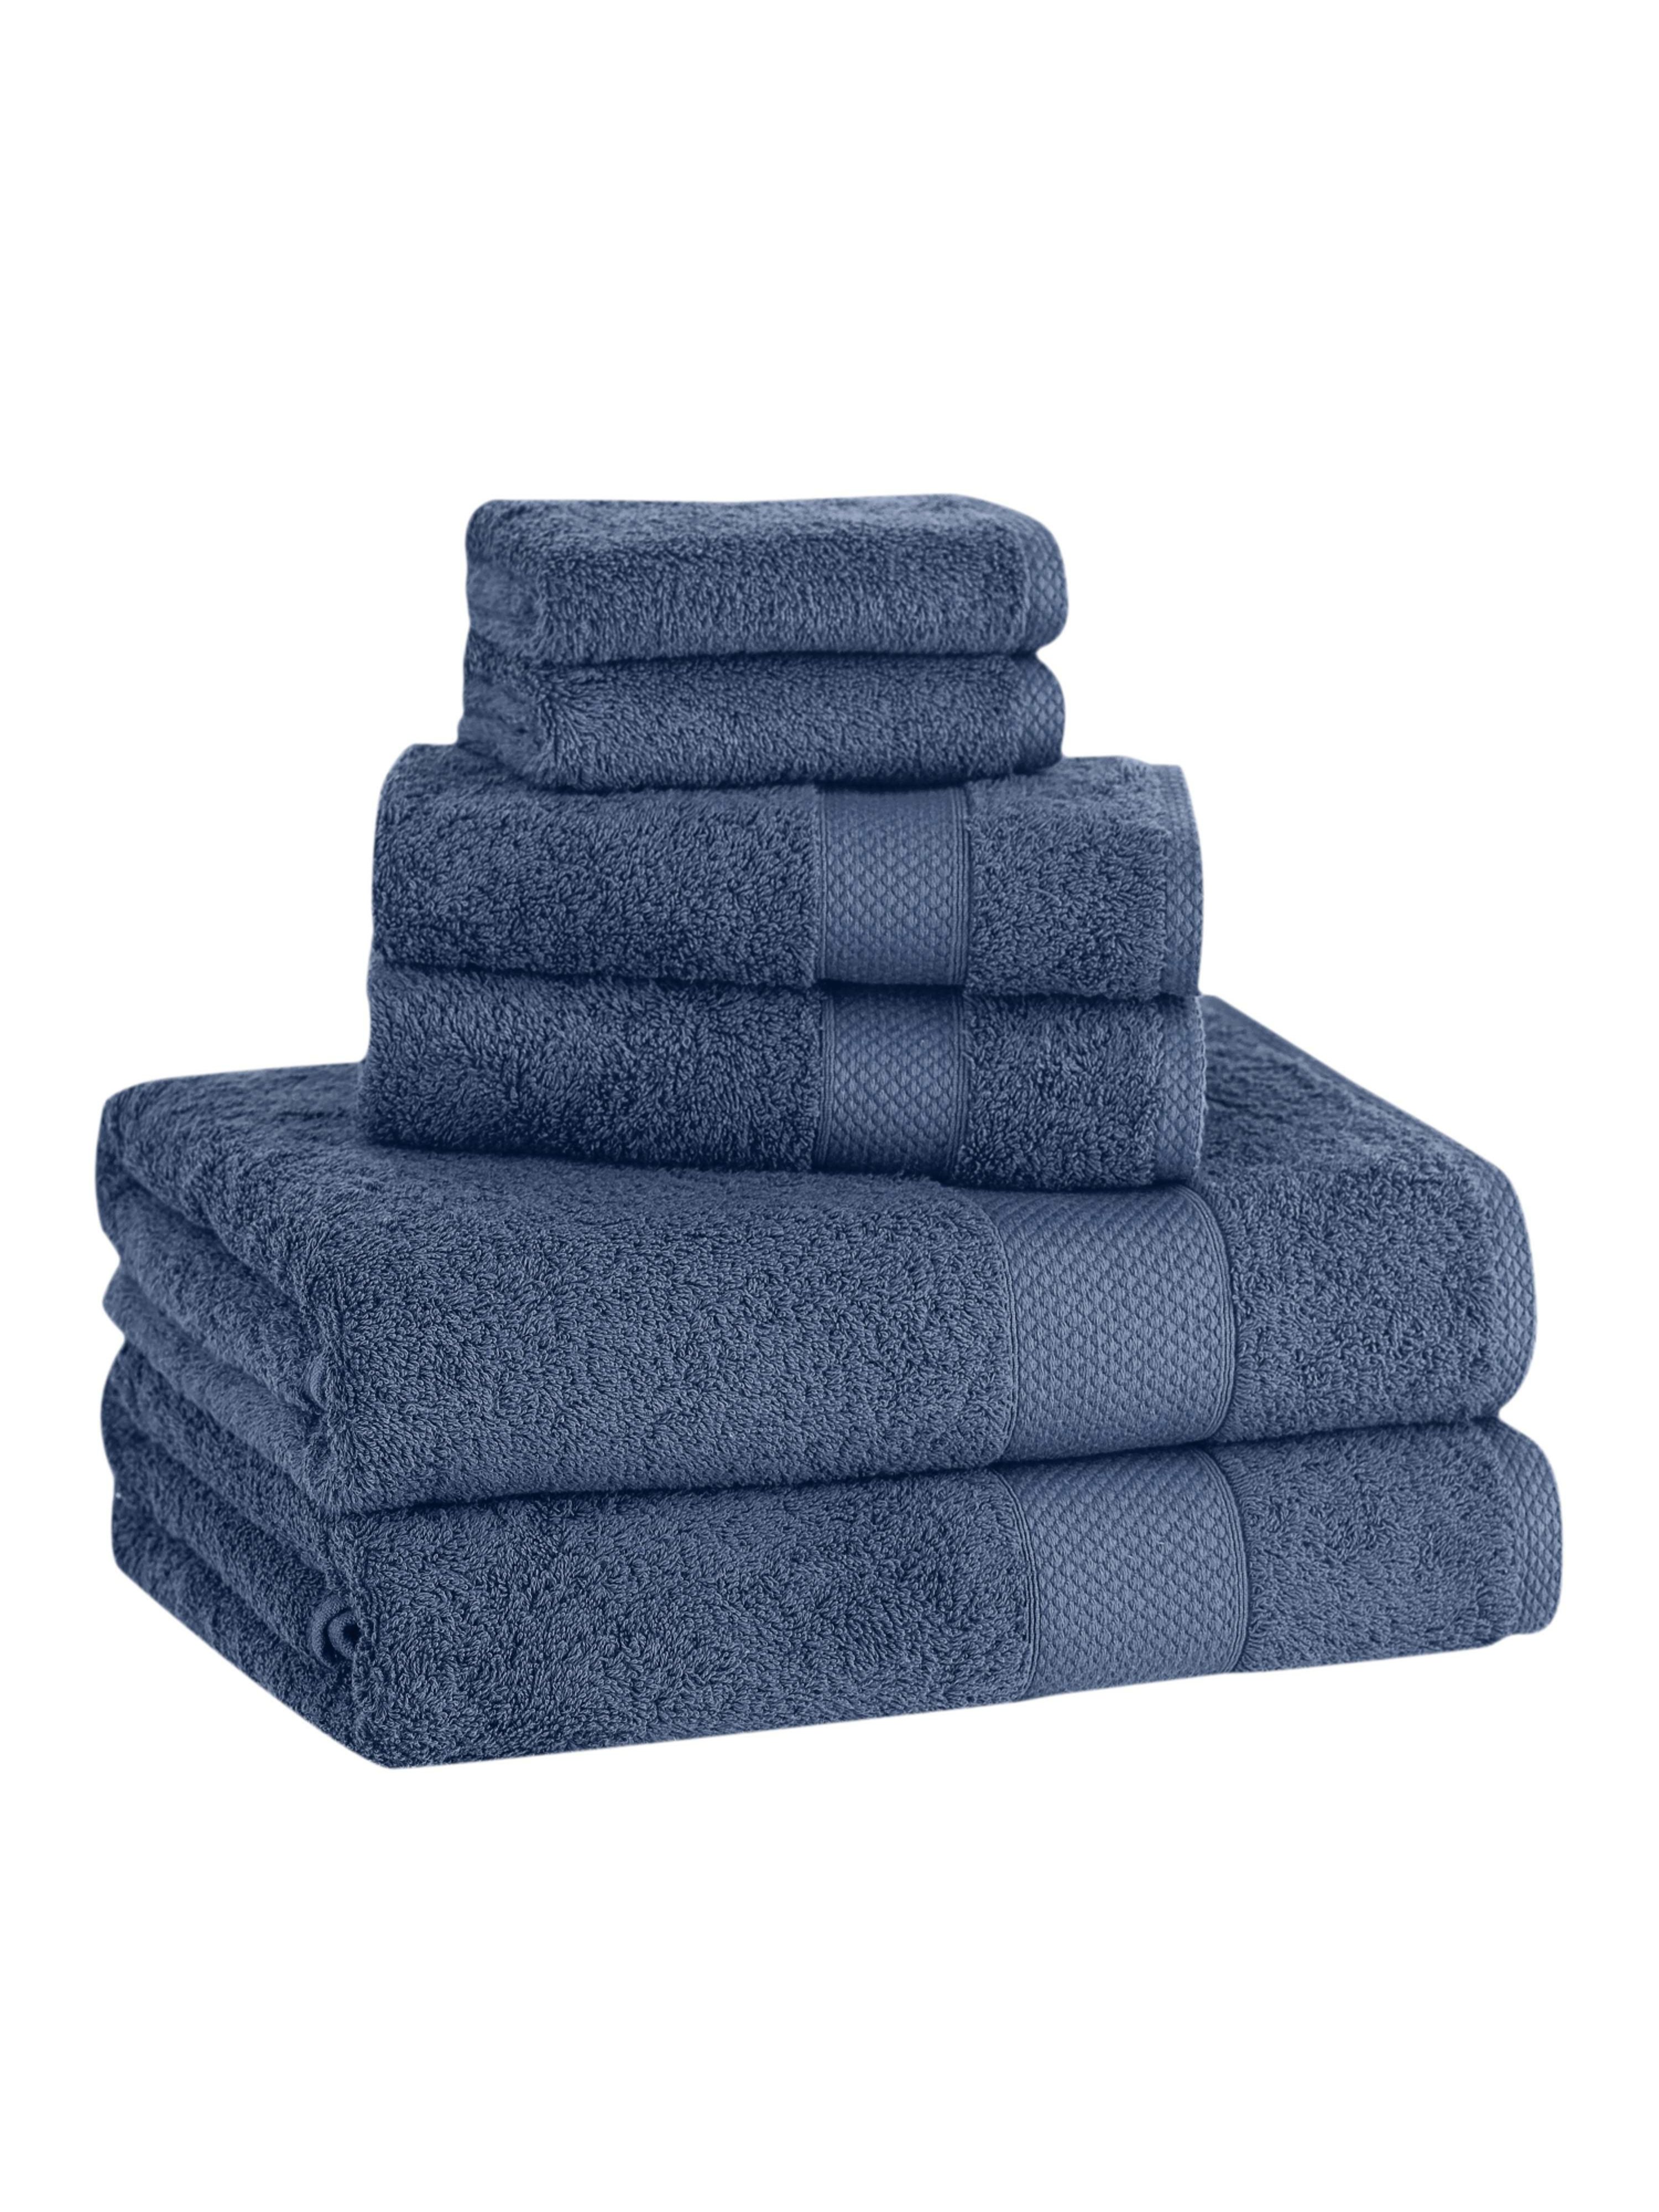 Classic Turkish Towels Luxury Madison Turkish Towels Set Of 6-piece Plush And Thick In Blue